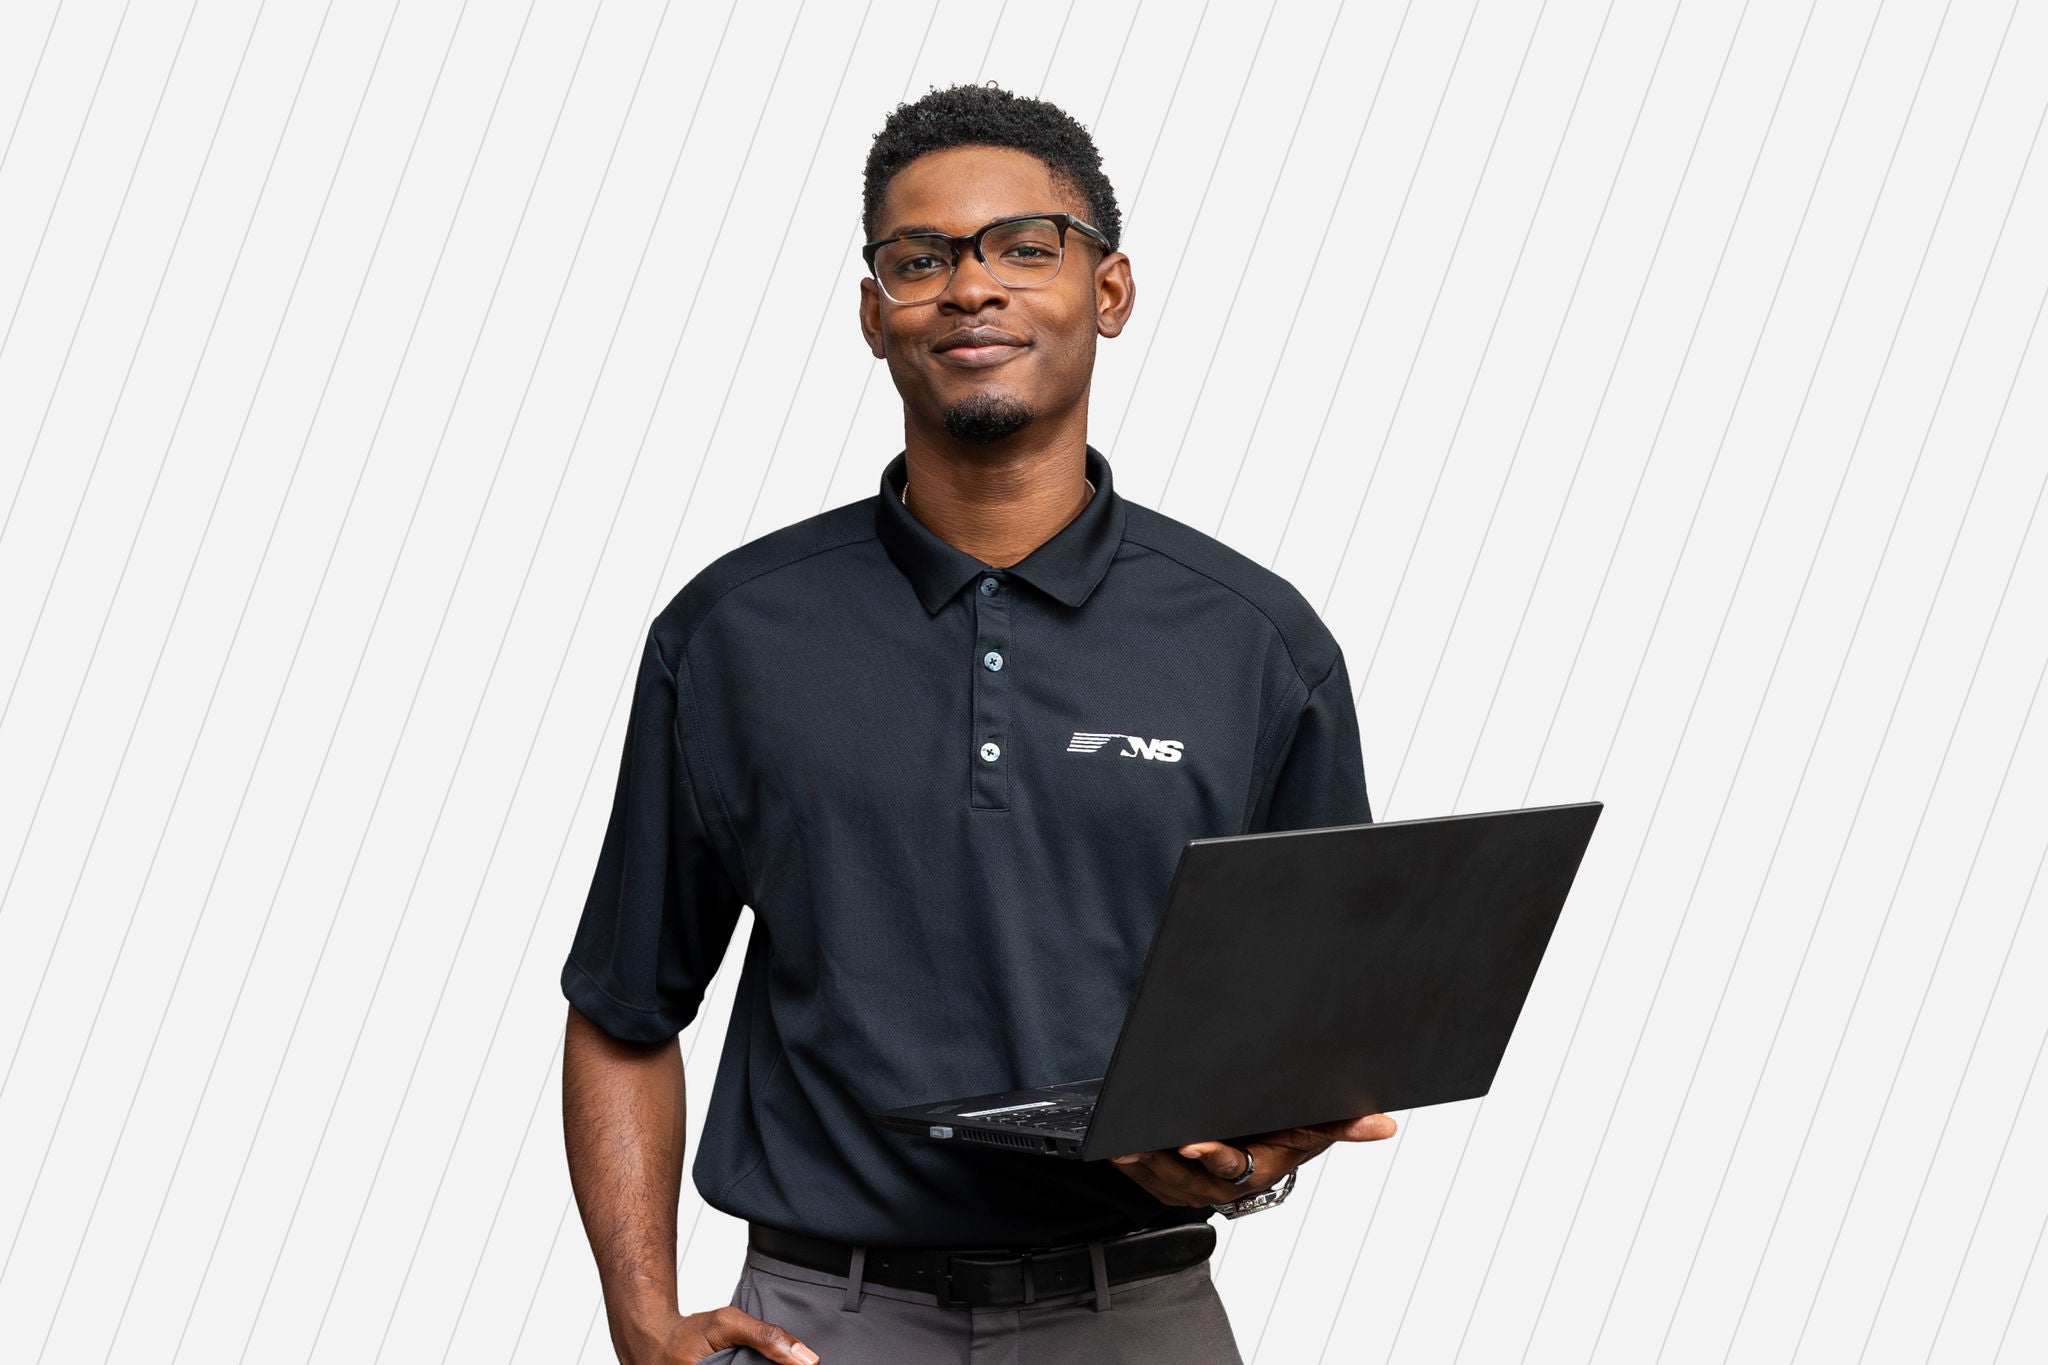 A Norfolk Southern technologist holds his computer and smiles thinking about the work he does on railway technology.